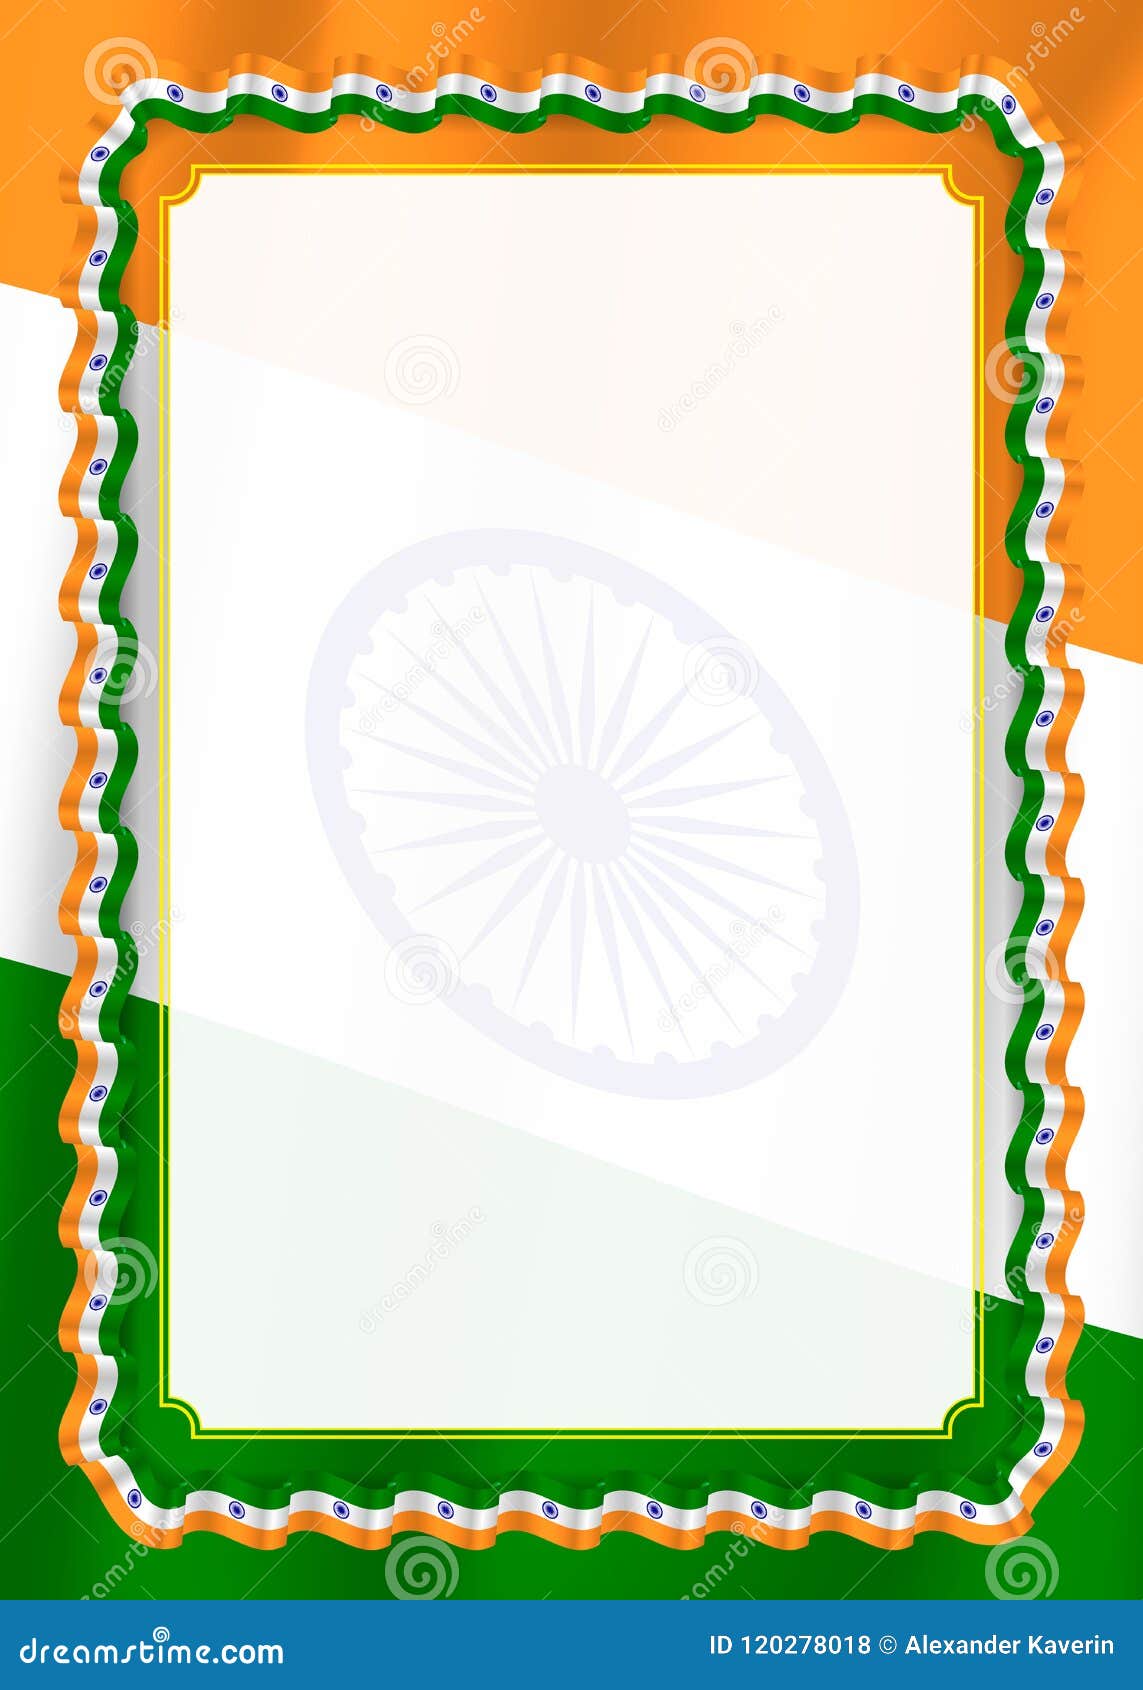 Frame And Border Of Ribbon With India Flag Template Elements For Your Certificate And Diploma Vector Stock Illustration Illustration Of Retro Decoration 120278018